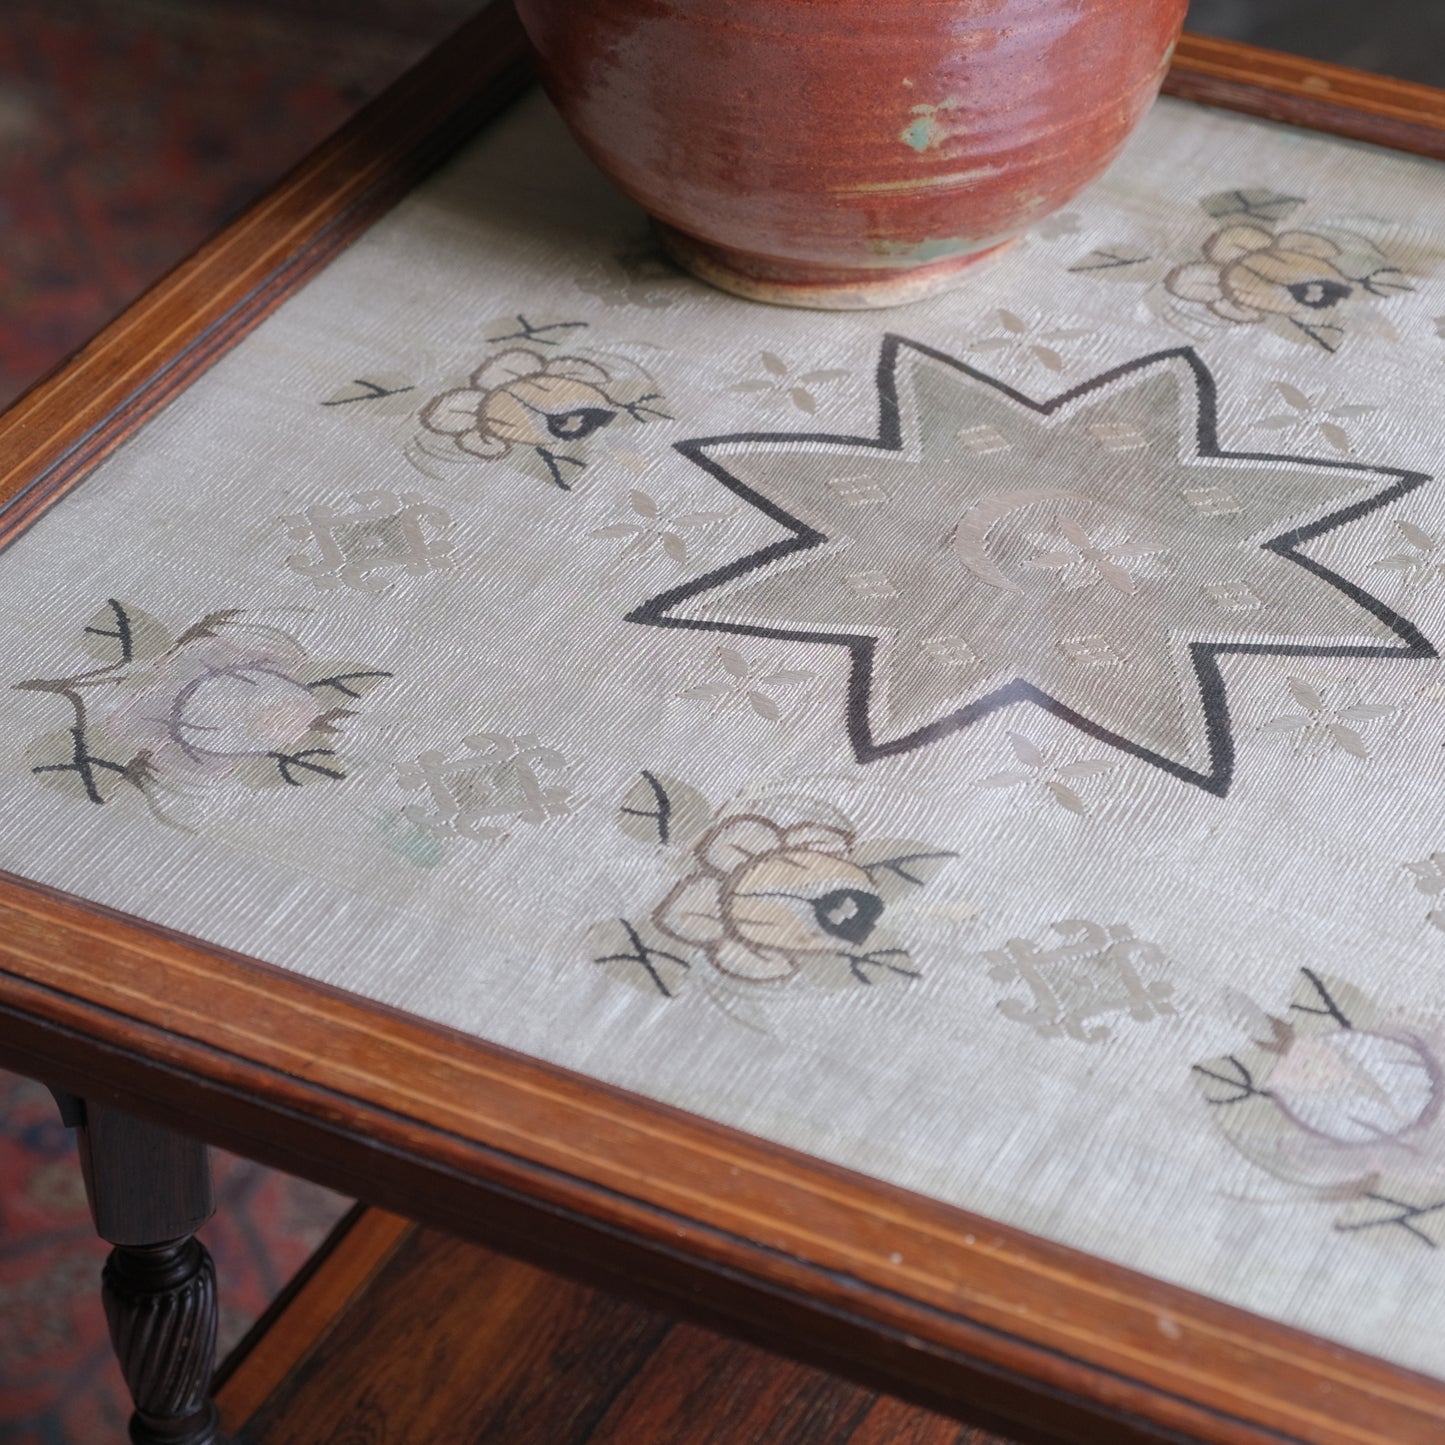 Mahogany side lamp table - embroidery under glass